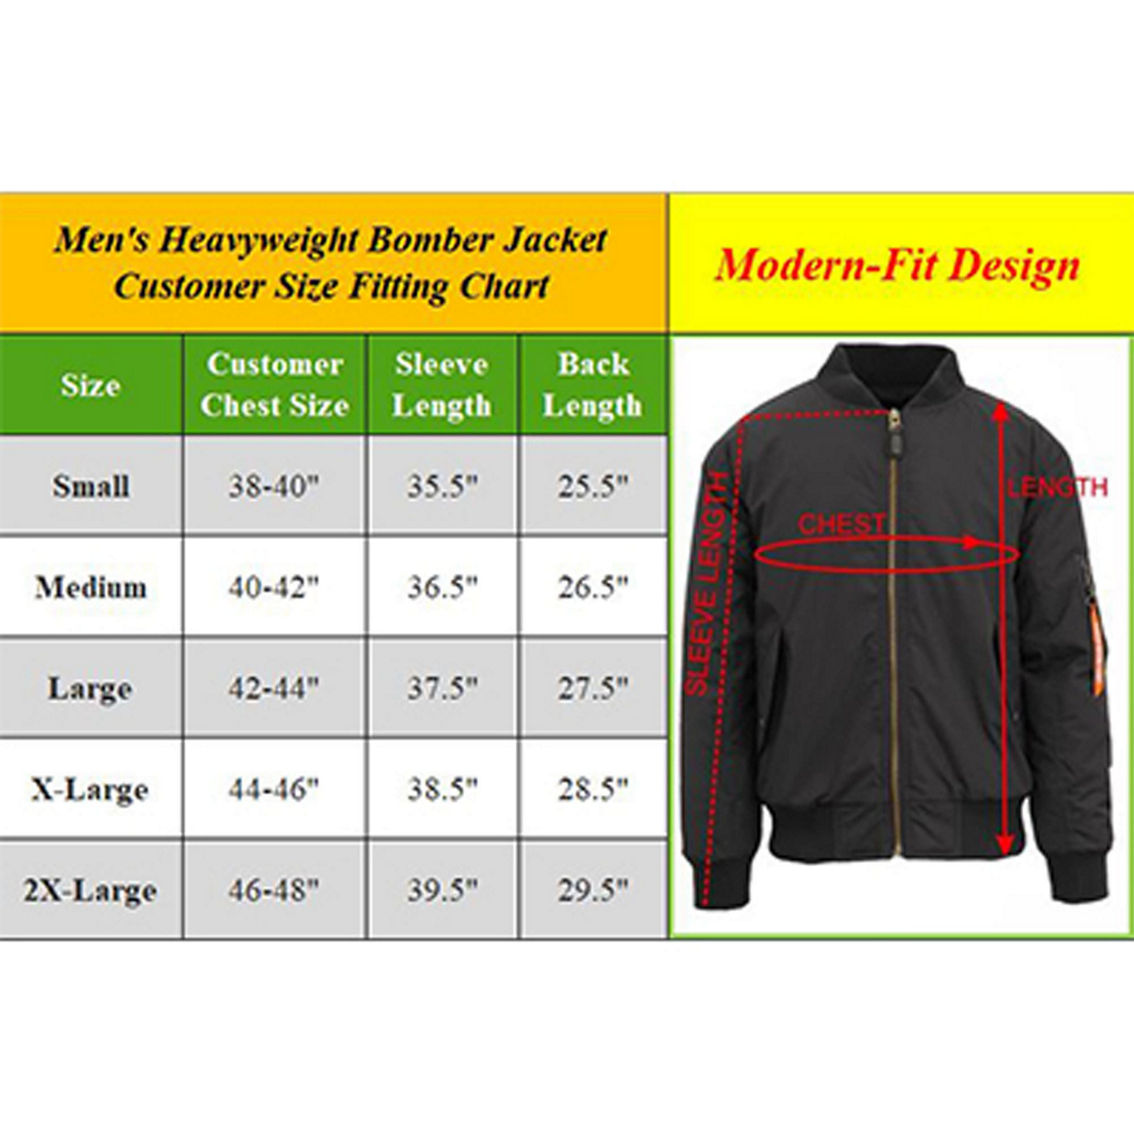 Spire By Galaxy Men's Heavyweight MA-1 Bomber Flight Jacket - 2 Pack - Image 3 of 3